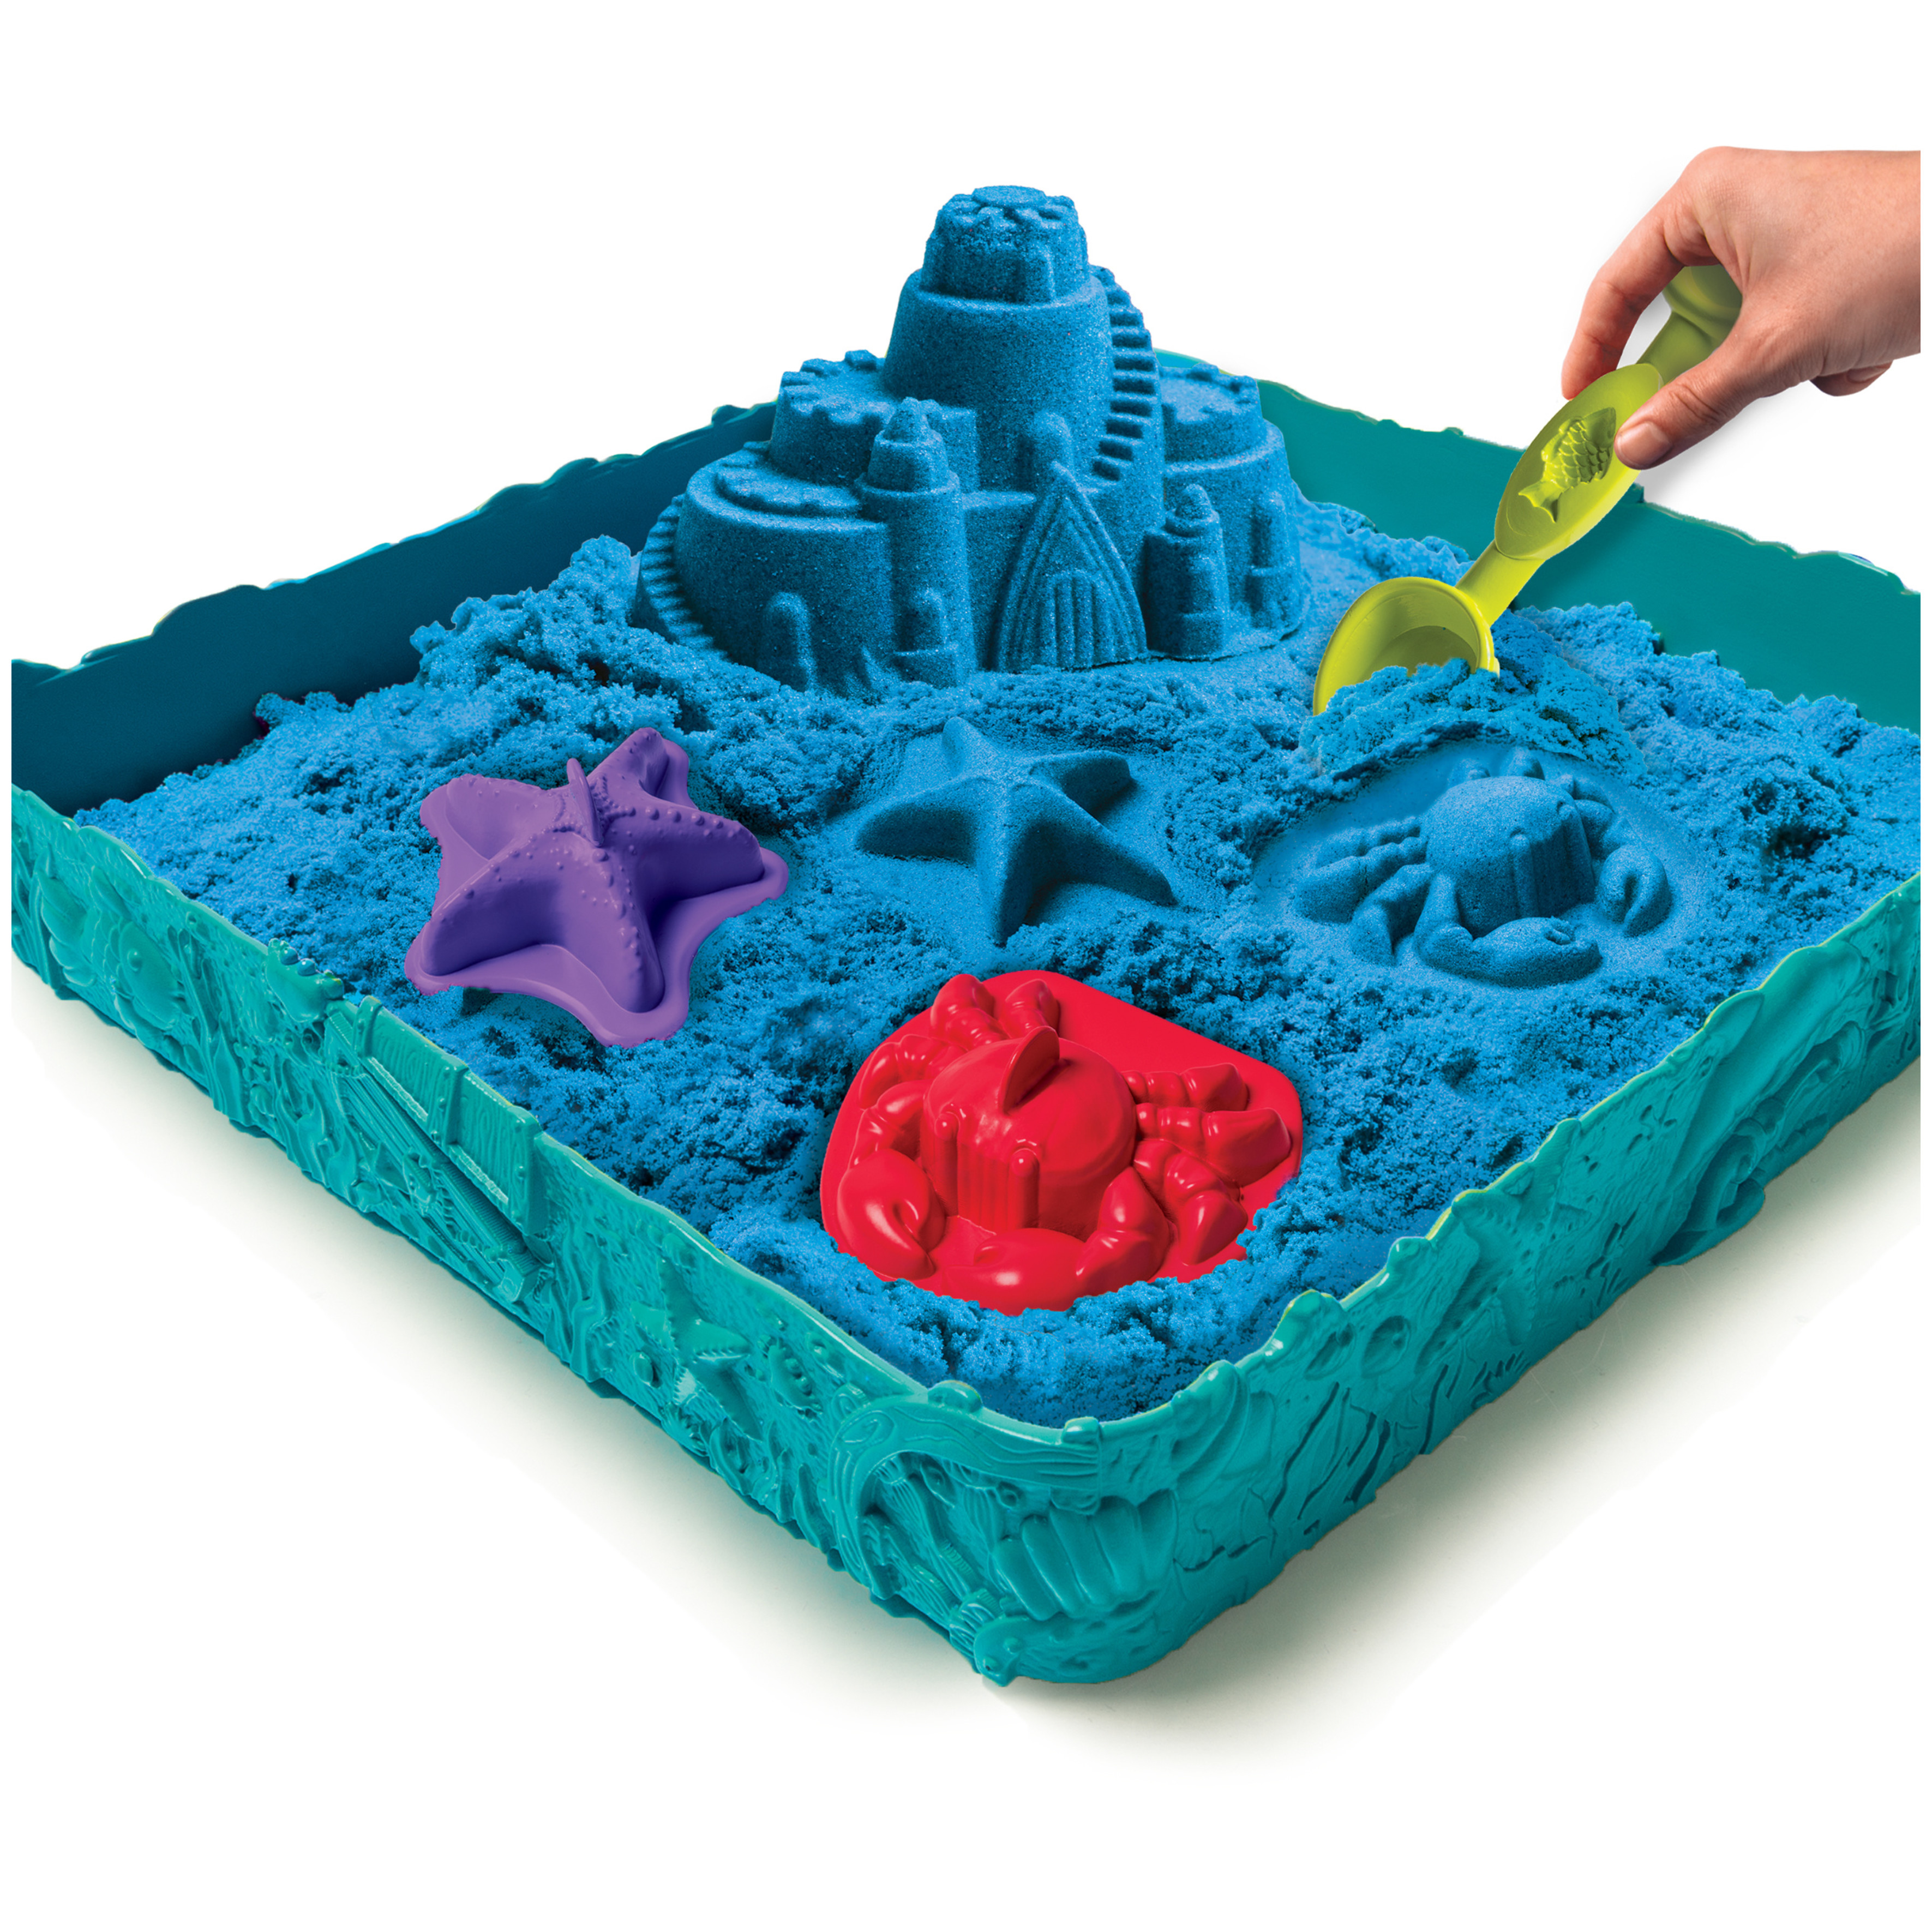 Kinetic Sand Sandcastle Set with 1lb of Kinetic Sand and Tools and Molds (Color May Vary) - image 3 of 9